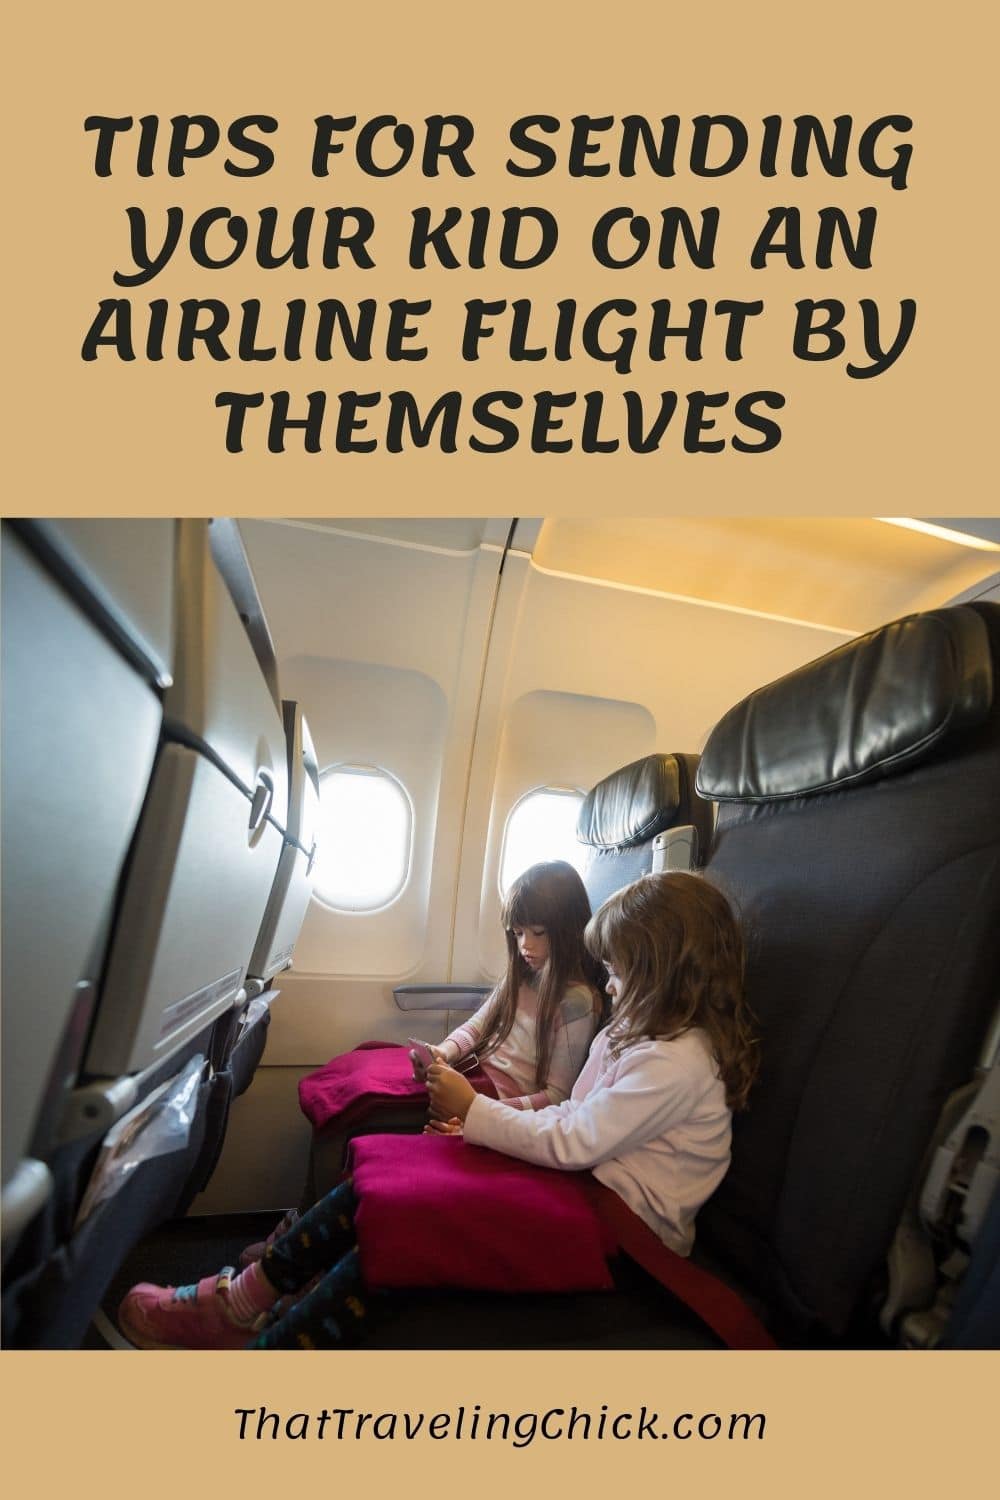 Tips for Sending Your Kid on an Airline Flight by Themselves